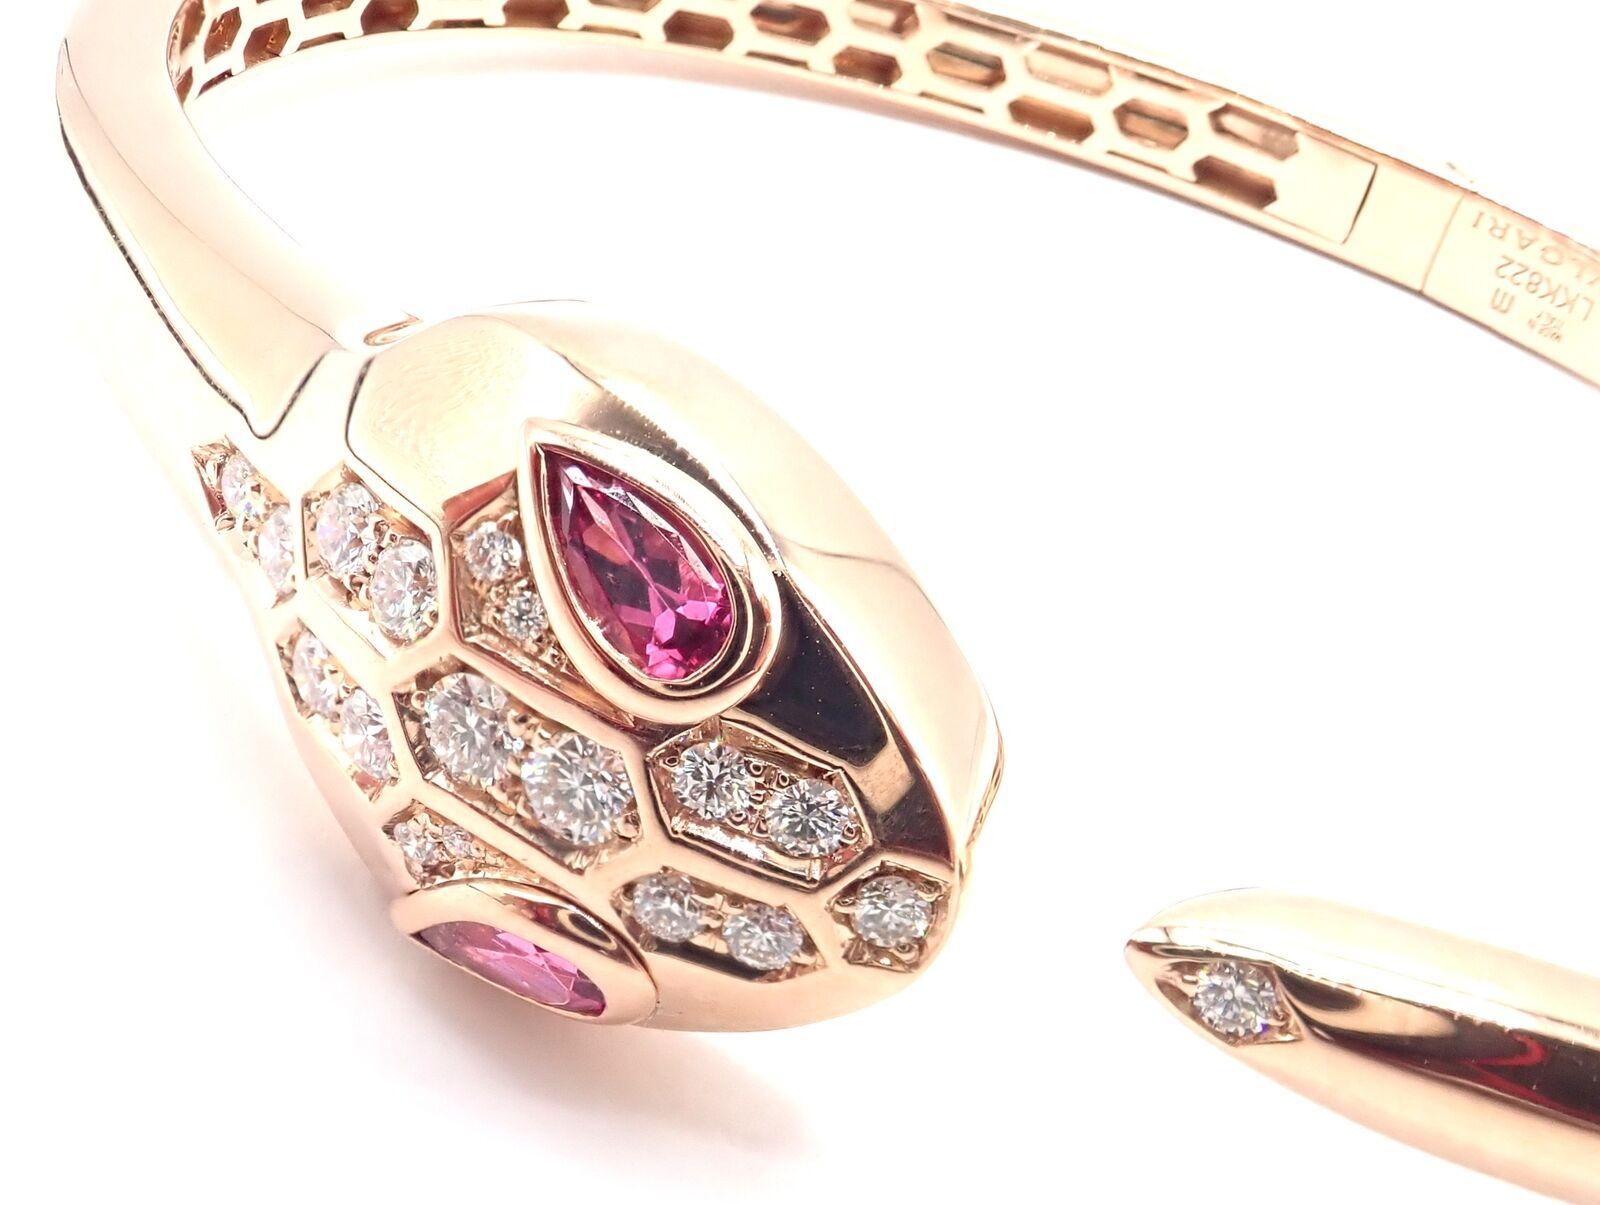 18k Rose Gold Diamond Rubellite Serpenti Snake Bangle Bracelet by Bulgari. 
With 18 round brilliant cut diamonds VS1 clarity, E color total weight approx. .30ct
2 pear shape rubellite stones.
This bracelet comes with certificate of